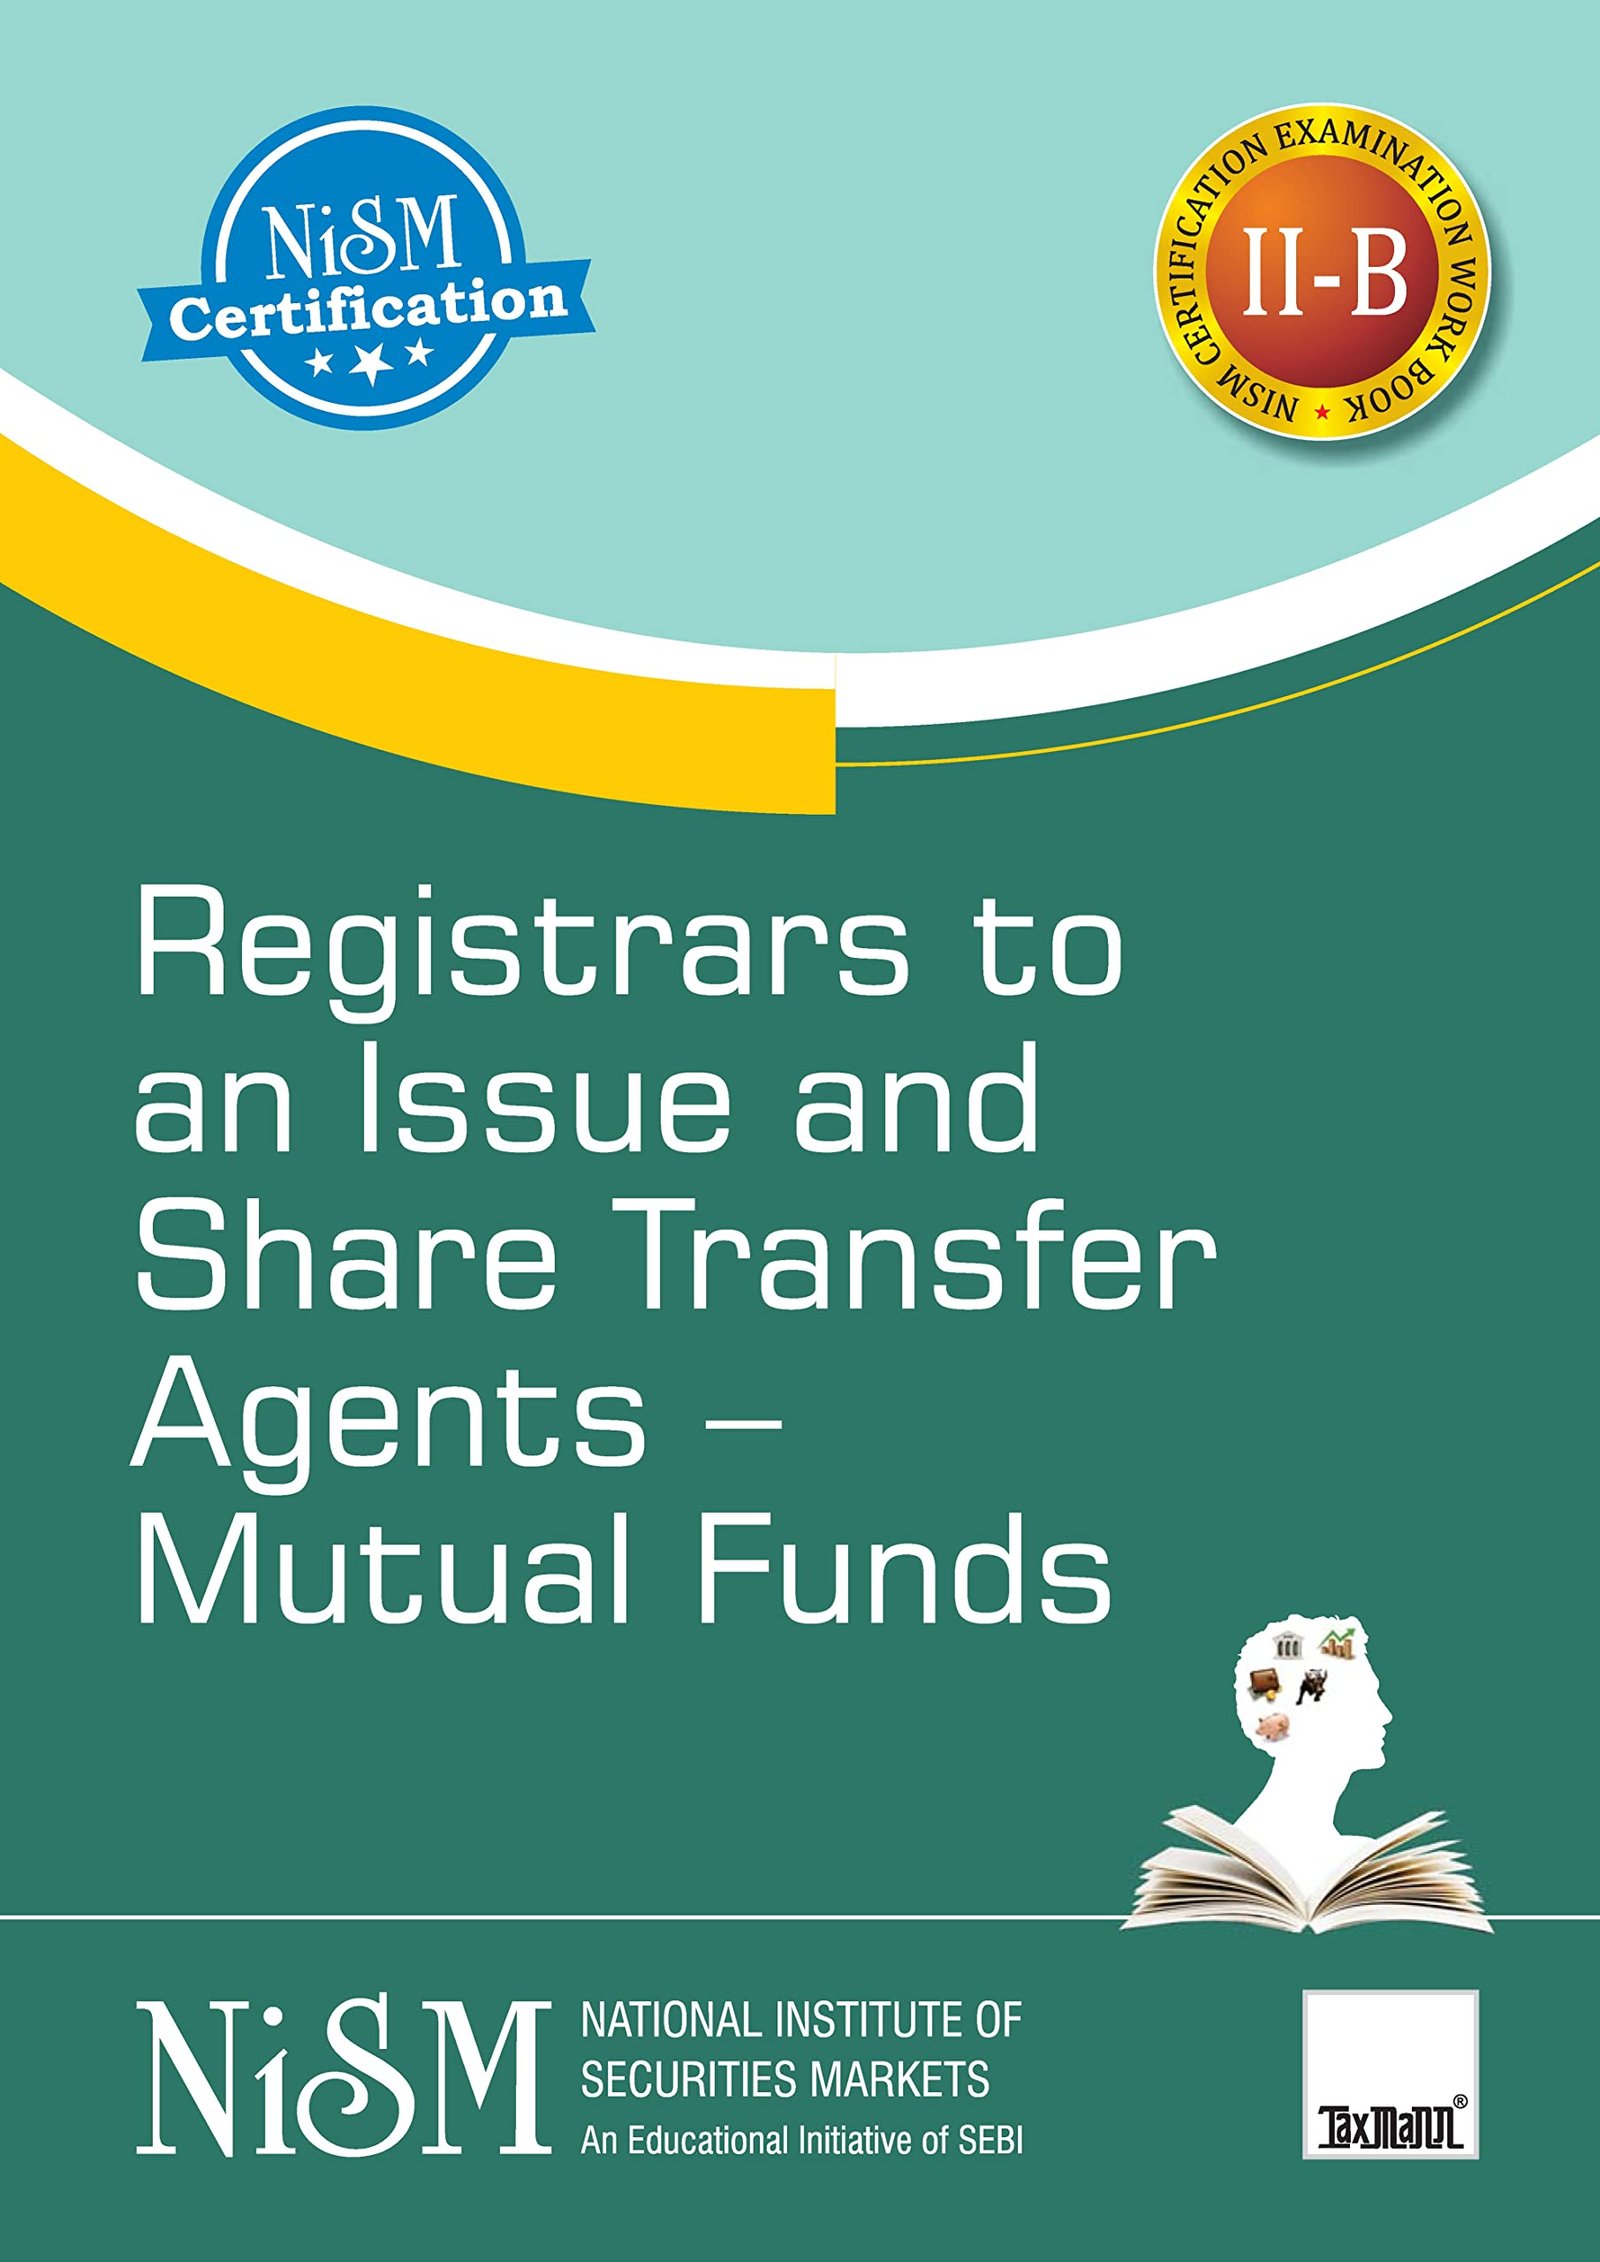 NISM-Series-II-B: Registrars to an Issue and Share Transfer Agents - Mutual Funds Certification Examination (English)